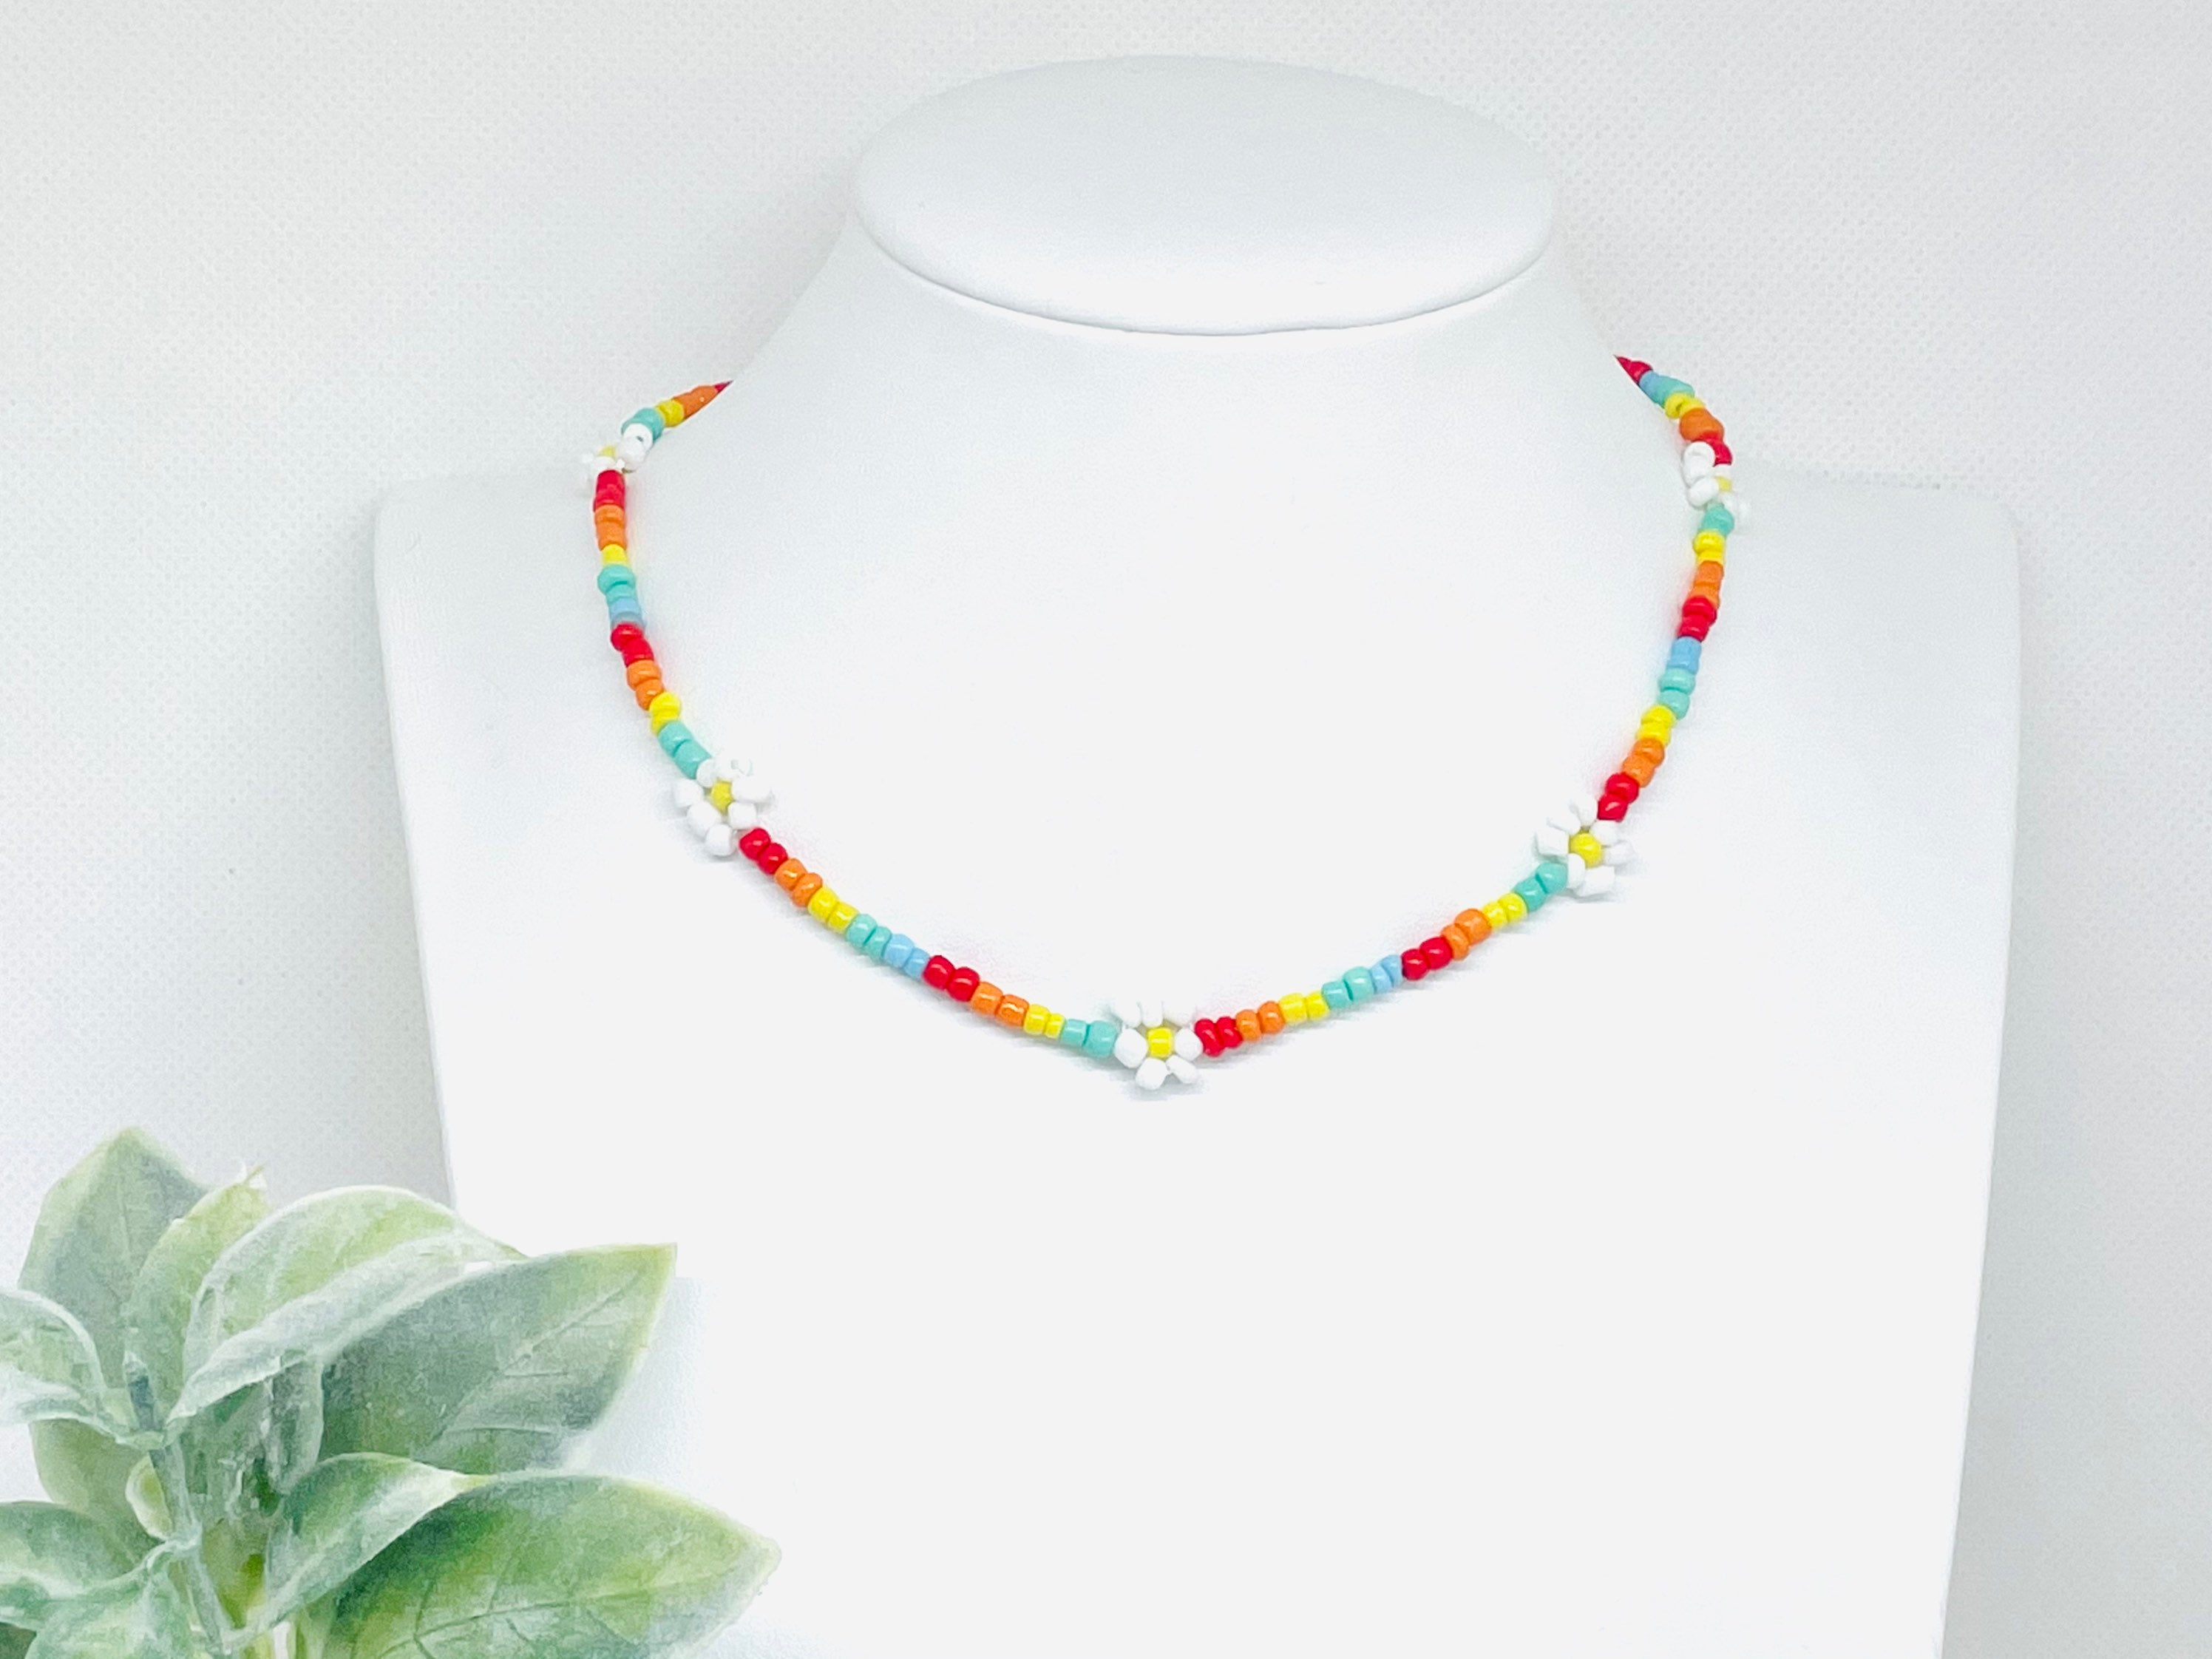 Buy Beaded Necklace, Daisy Flower Necklace, Daisy Choker, Gift for Her,  Colorful Necklace, Beaded Choker, Bridesmaids Gift, Handmade Jewelry Online  in India - Etsy